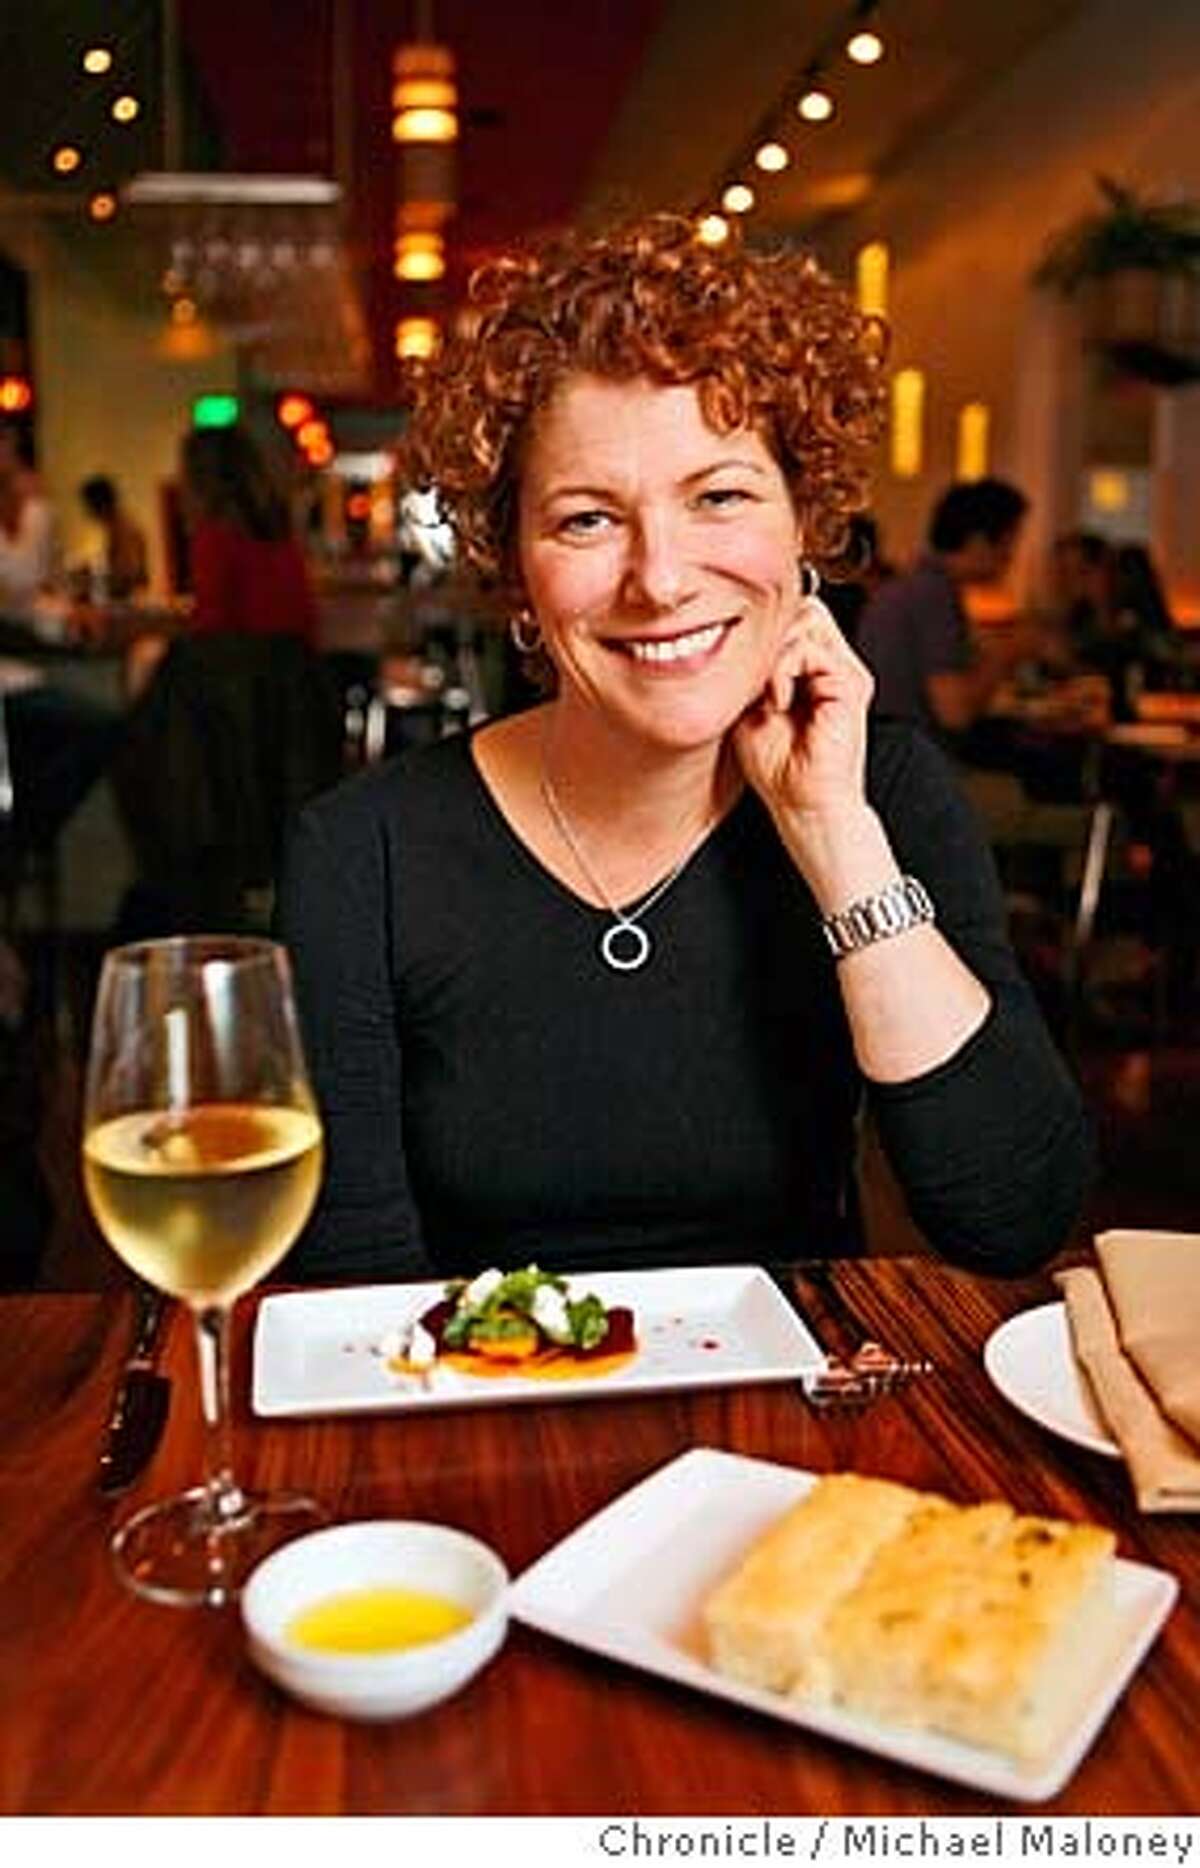 Cookbook author, cooking teacher and television personality Joanne Weir likes the excellent ingredients served at Nua restaurant in San Francisco's North Beach. Chronicle photo by Michael Maloney